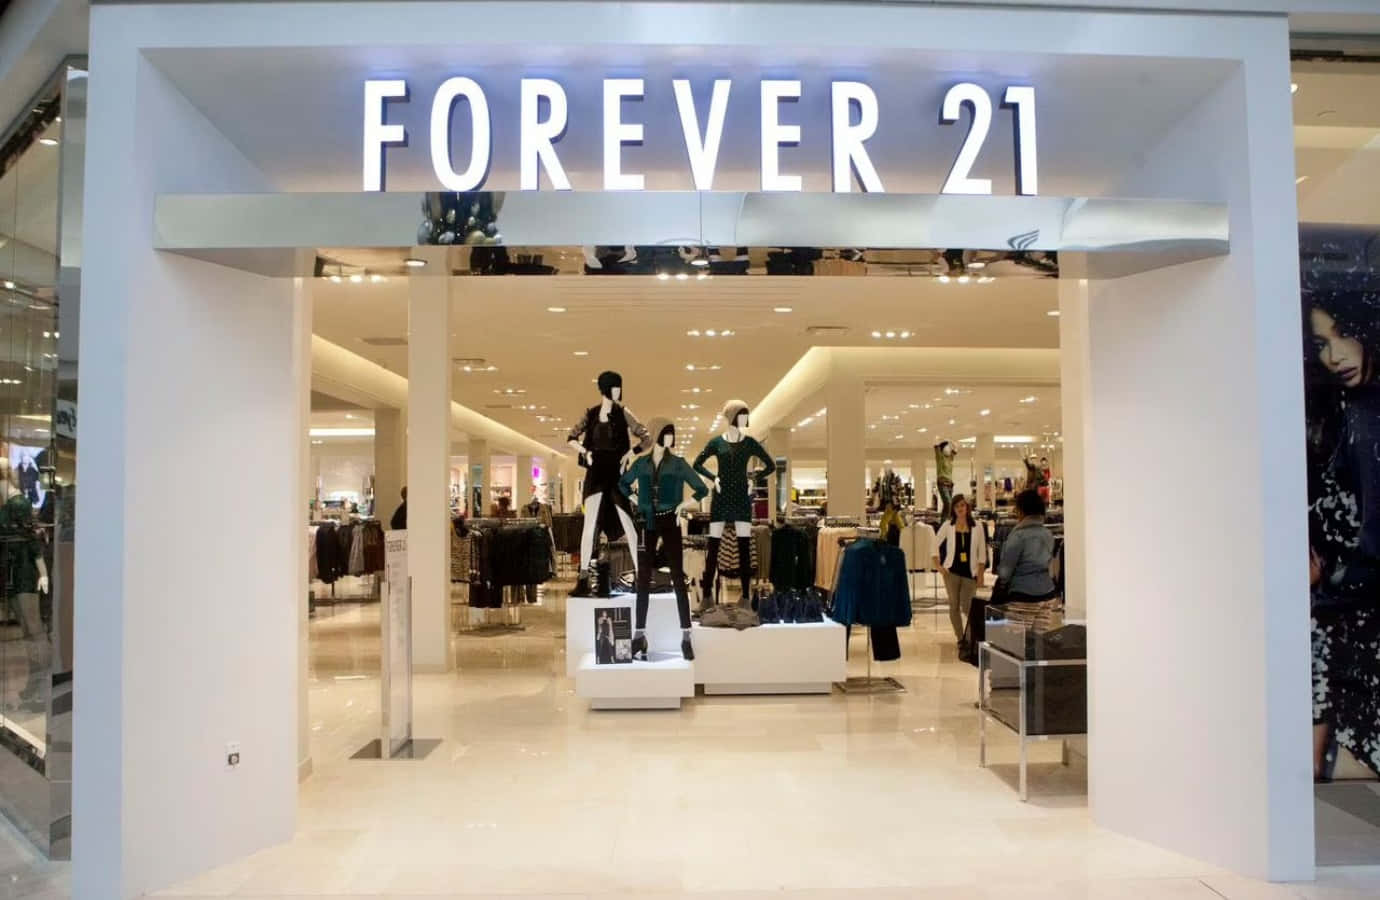 Update your wardrobe with the hottest trends from Forever 21